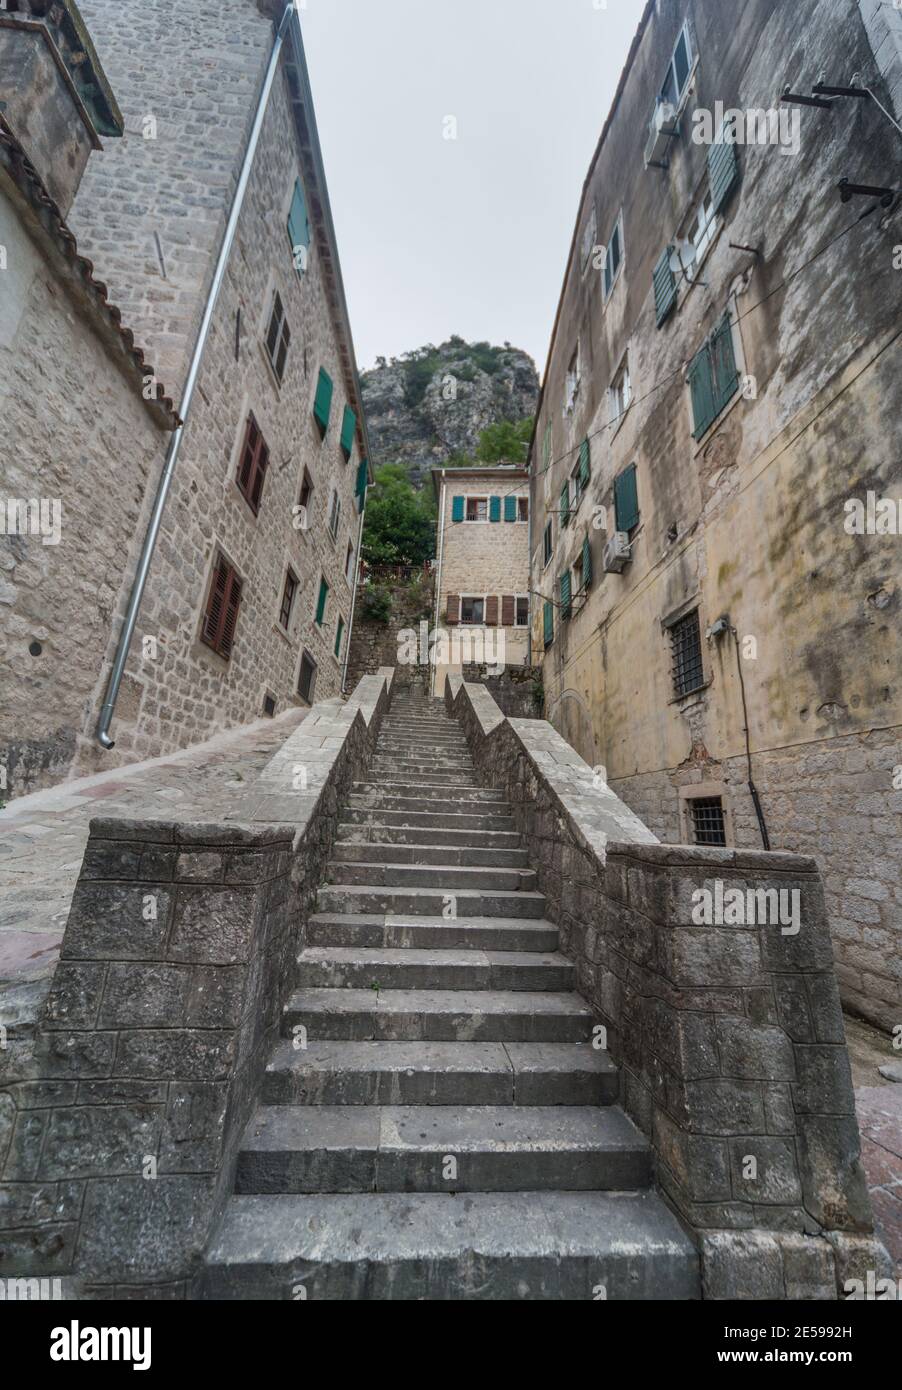 Steep stairs on a narrow street in the old town area of Kotor Stock Photo  by ©Mentor56 328624602